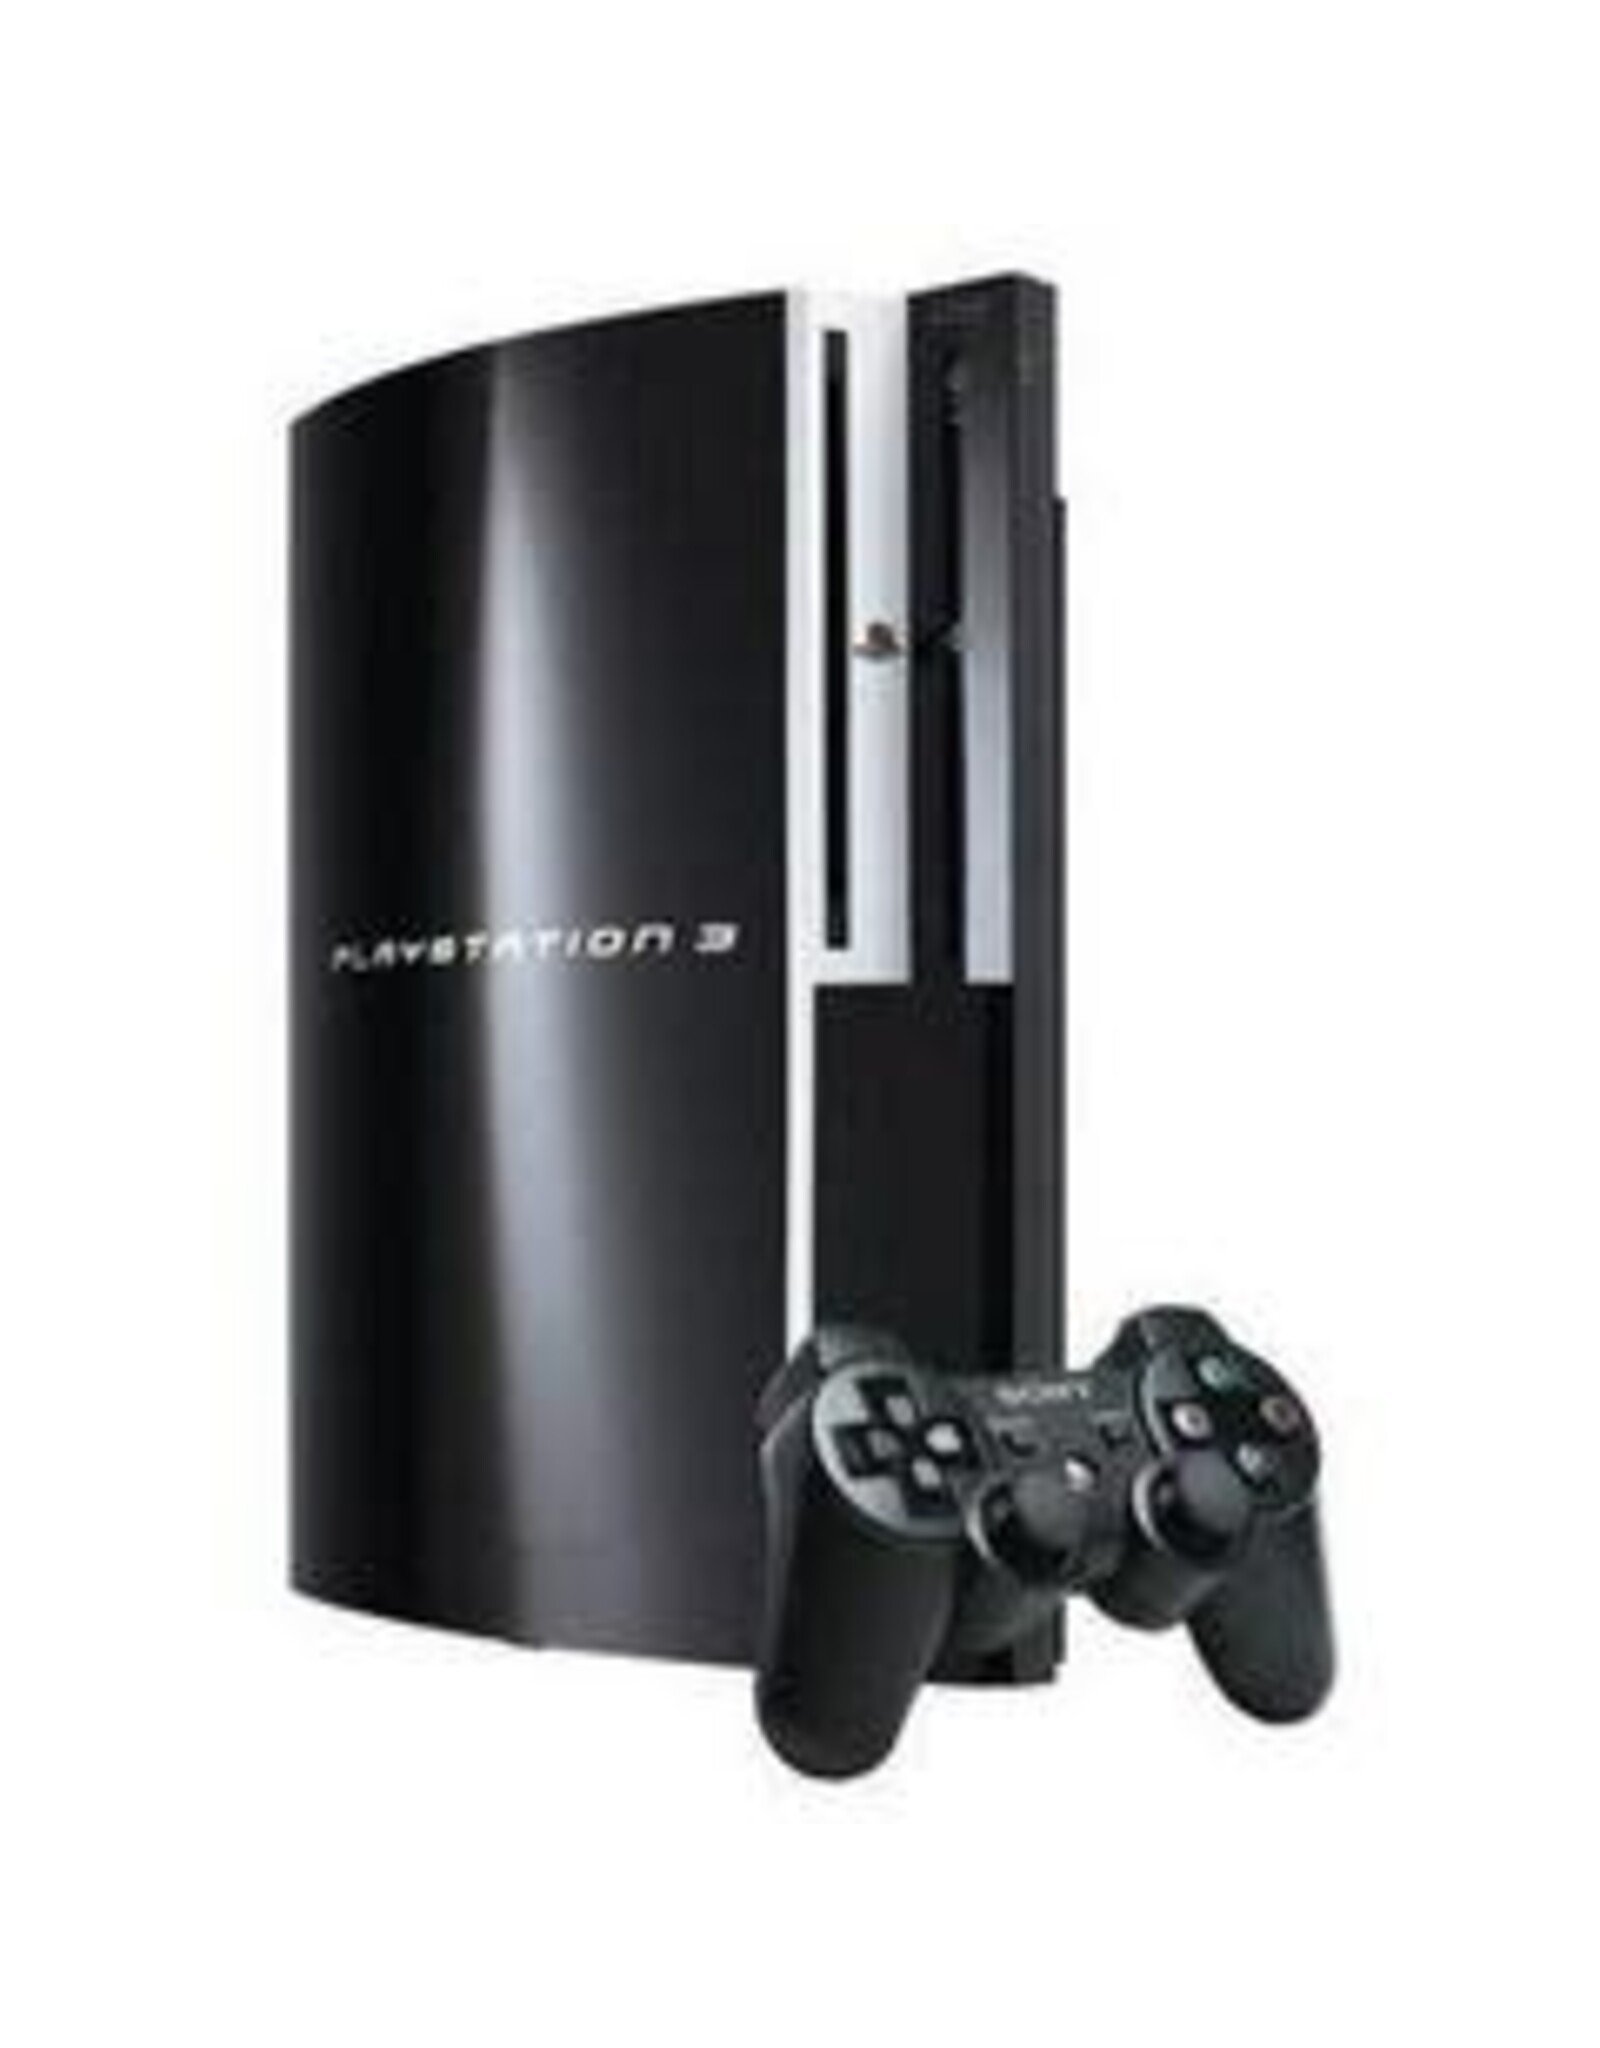 Sony PS3 Playstation 3 Console 60GB - Backwards Compatible (Used)